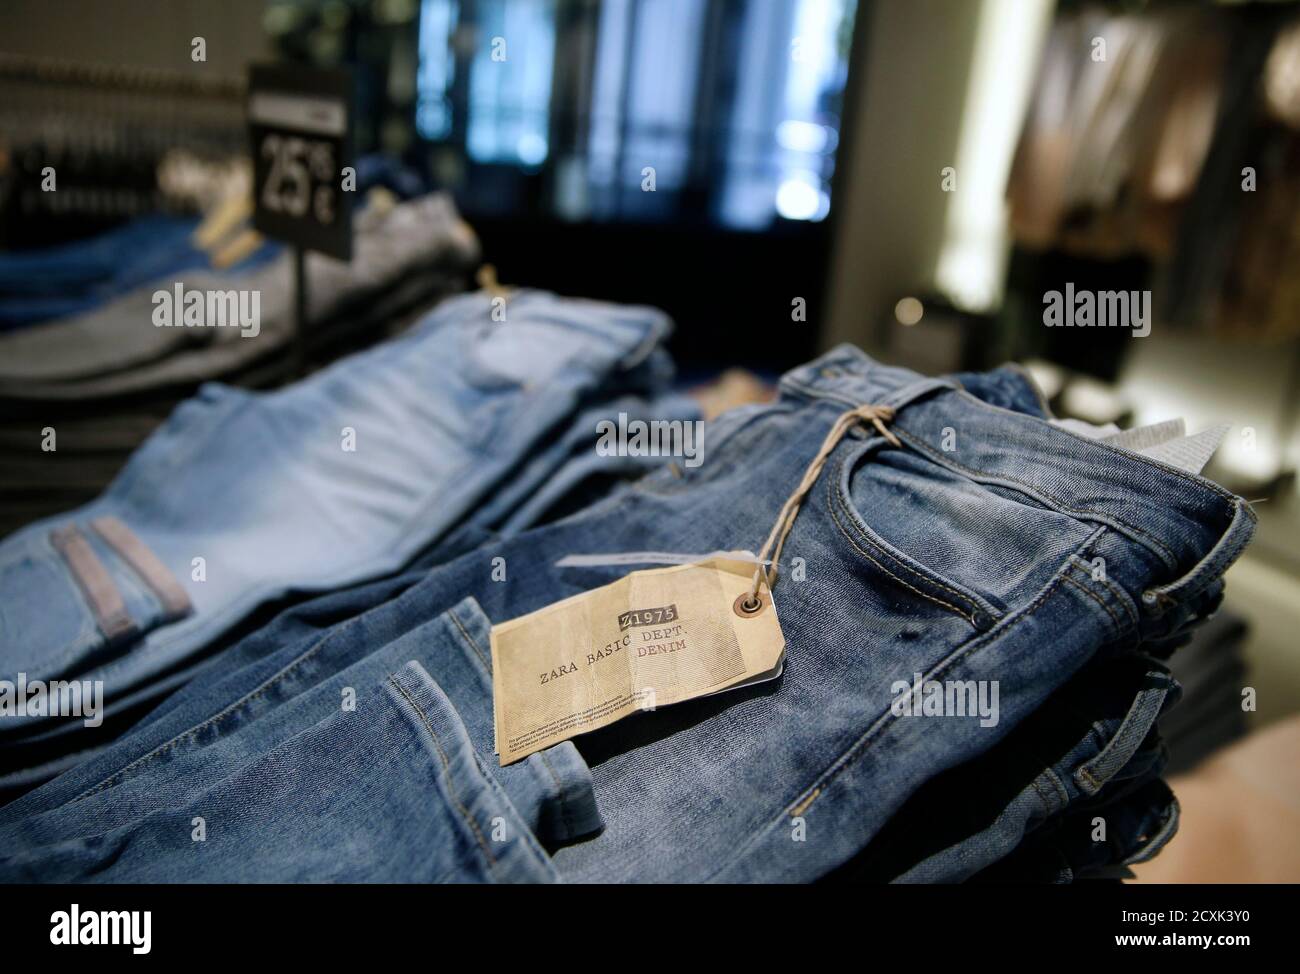 Jeans are displayed at a Zara store in Madrid March 18, 2014. Inditex, the  world's biggest fashion retailer, will accelerate investment in 2014 to  open more new stores after results last year